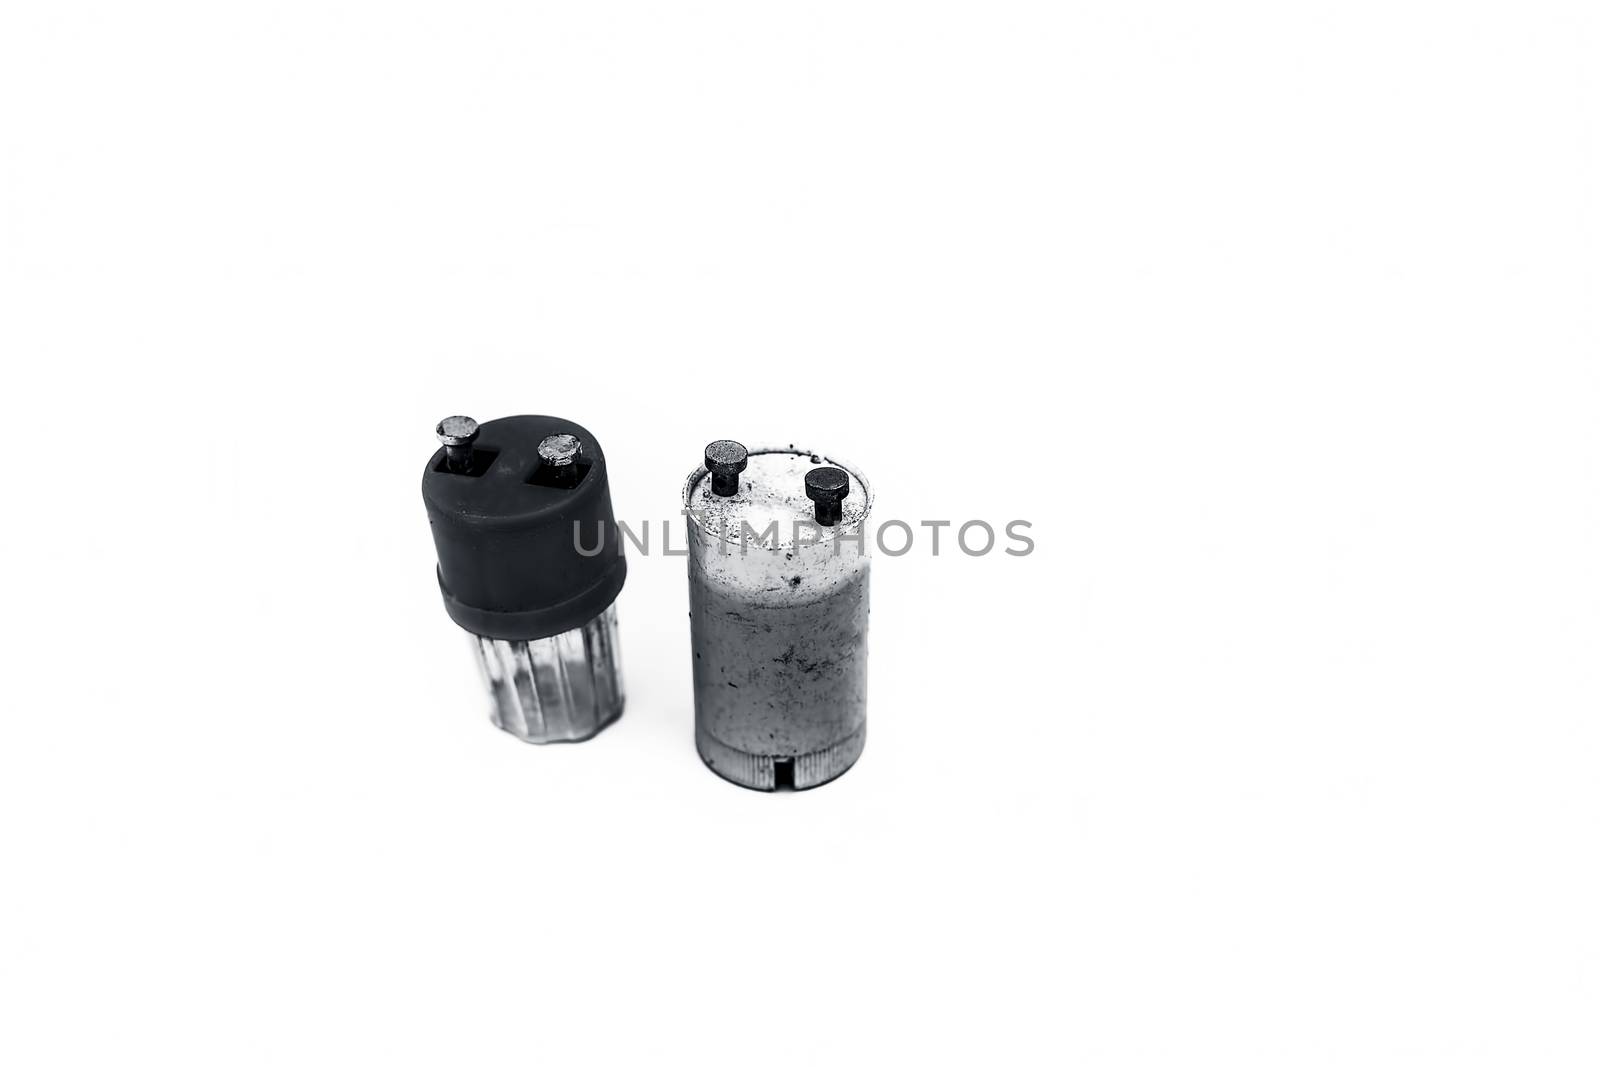 Close up of plastic colorful capacitors or stators isolated on white widely used in old types of Flour scent. by mirzamlk